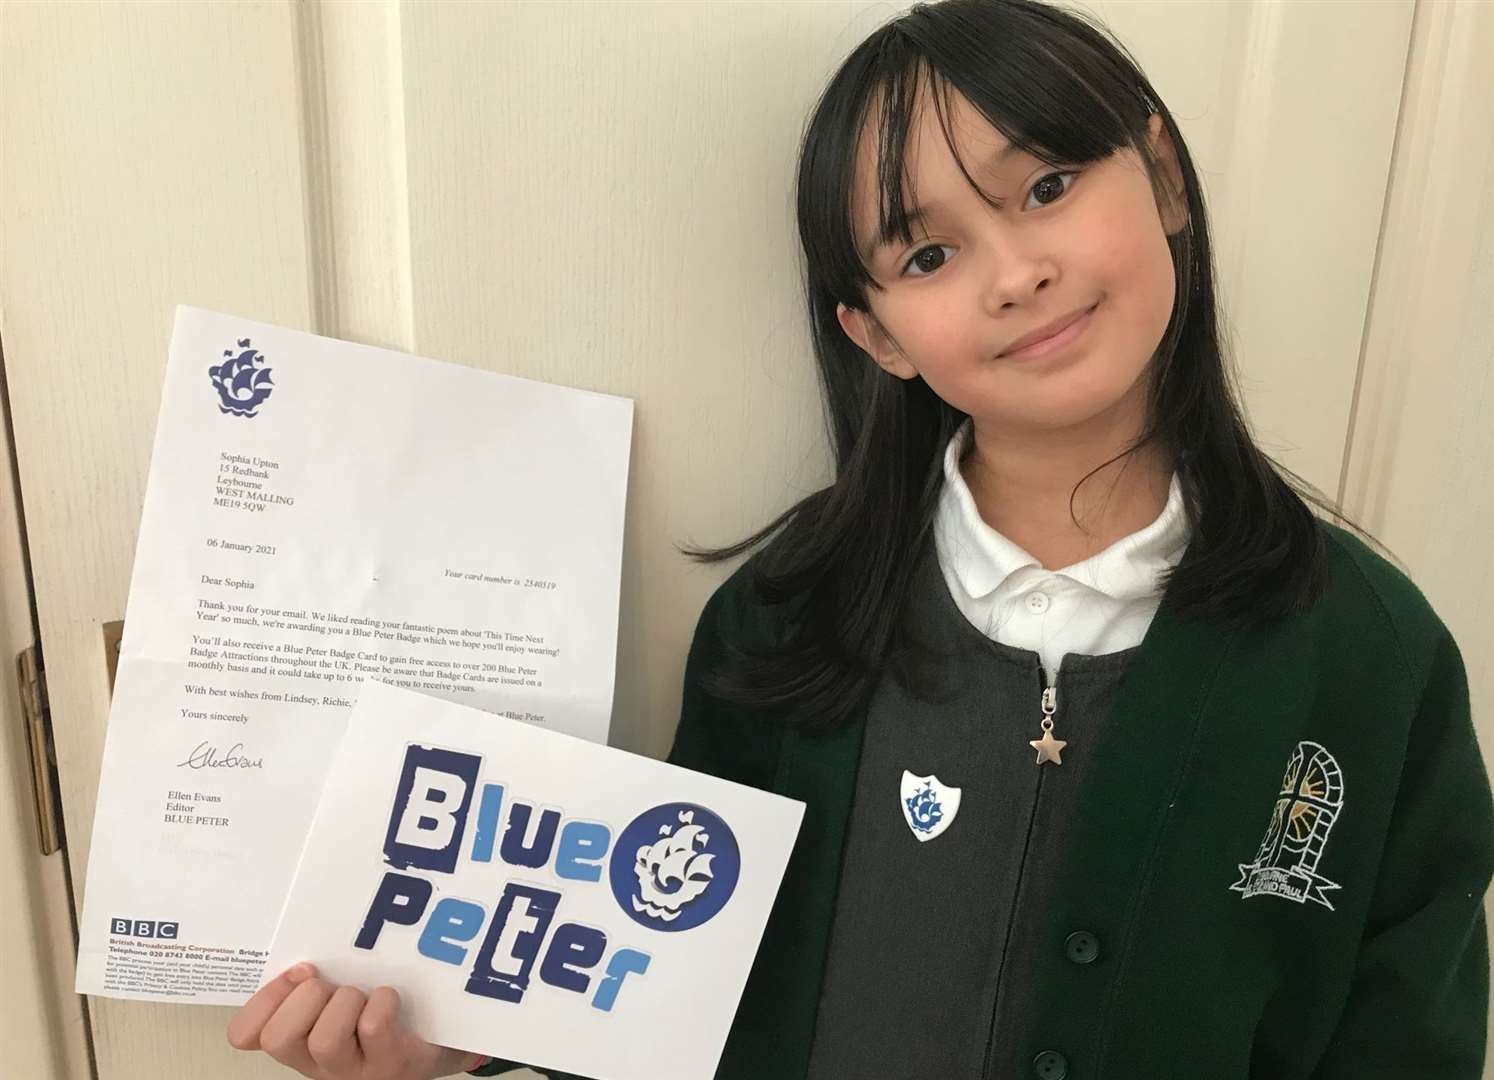 Sophia from Leybourne is proud of her Blue Peter badge